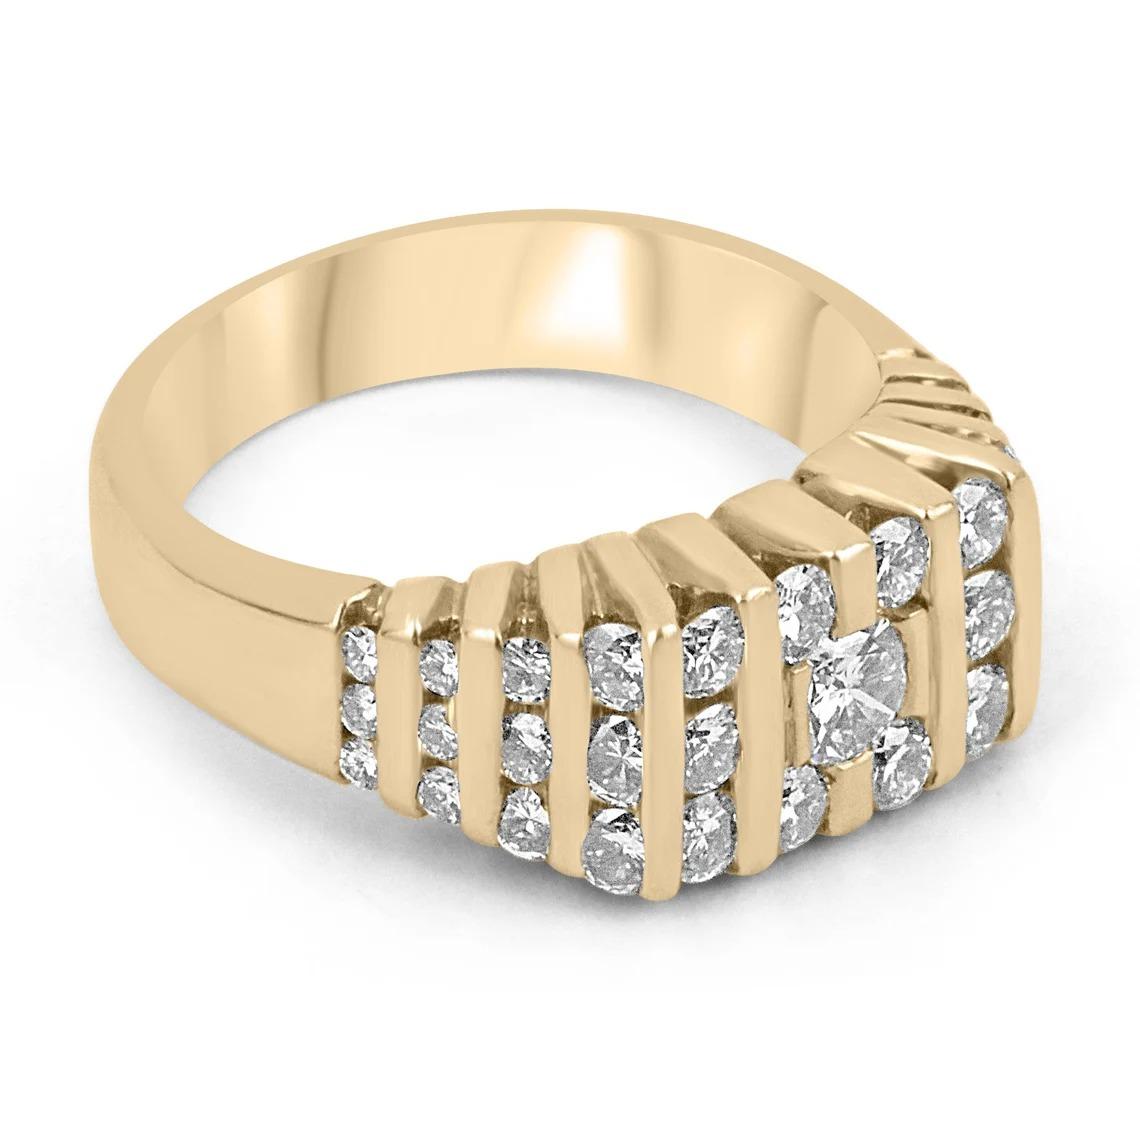 Setting Style: Channel
Setting Material: 18K Yellow Gold
Setting Weight: 13.1 Grams

Main Stone: Diamond
Diamond Count: 37
Weight: 1.65-Carats (Total)
Cut: Brilliant Round
Clarity: VVS
Color: H
Luster: Excellent
Treatments: Natural

Estimated Retail